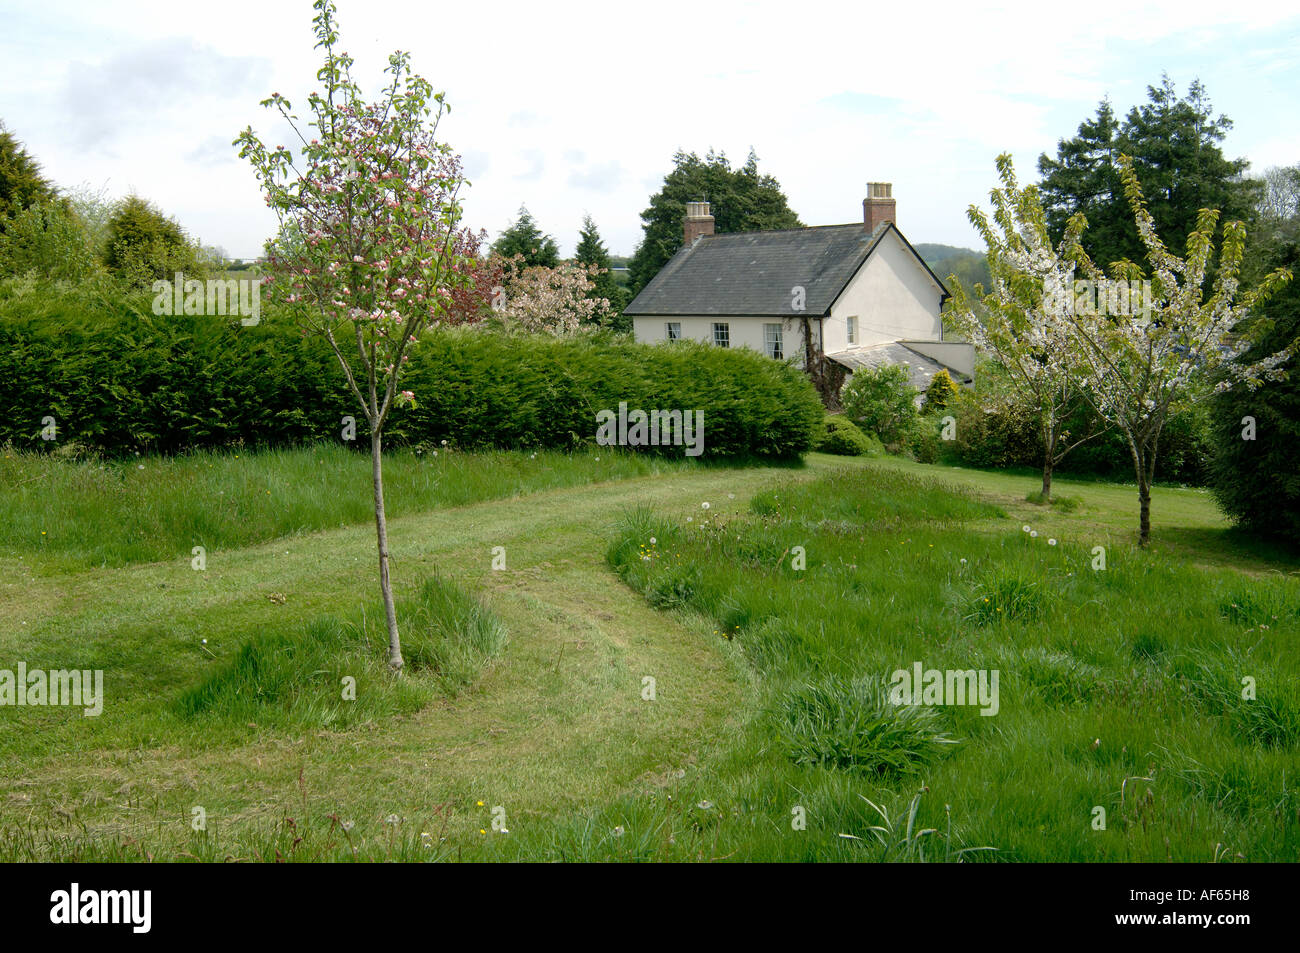 Granny Smith apple tree and cherries in full bloom tall grass lawns with pathways mown in a country garden Stock Photo